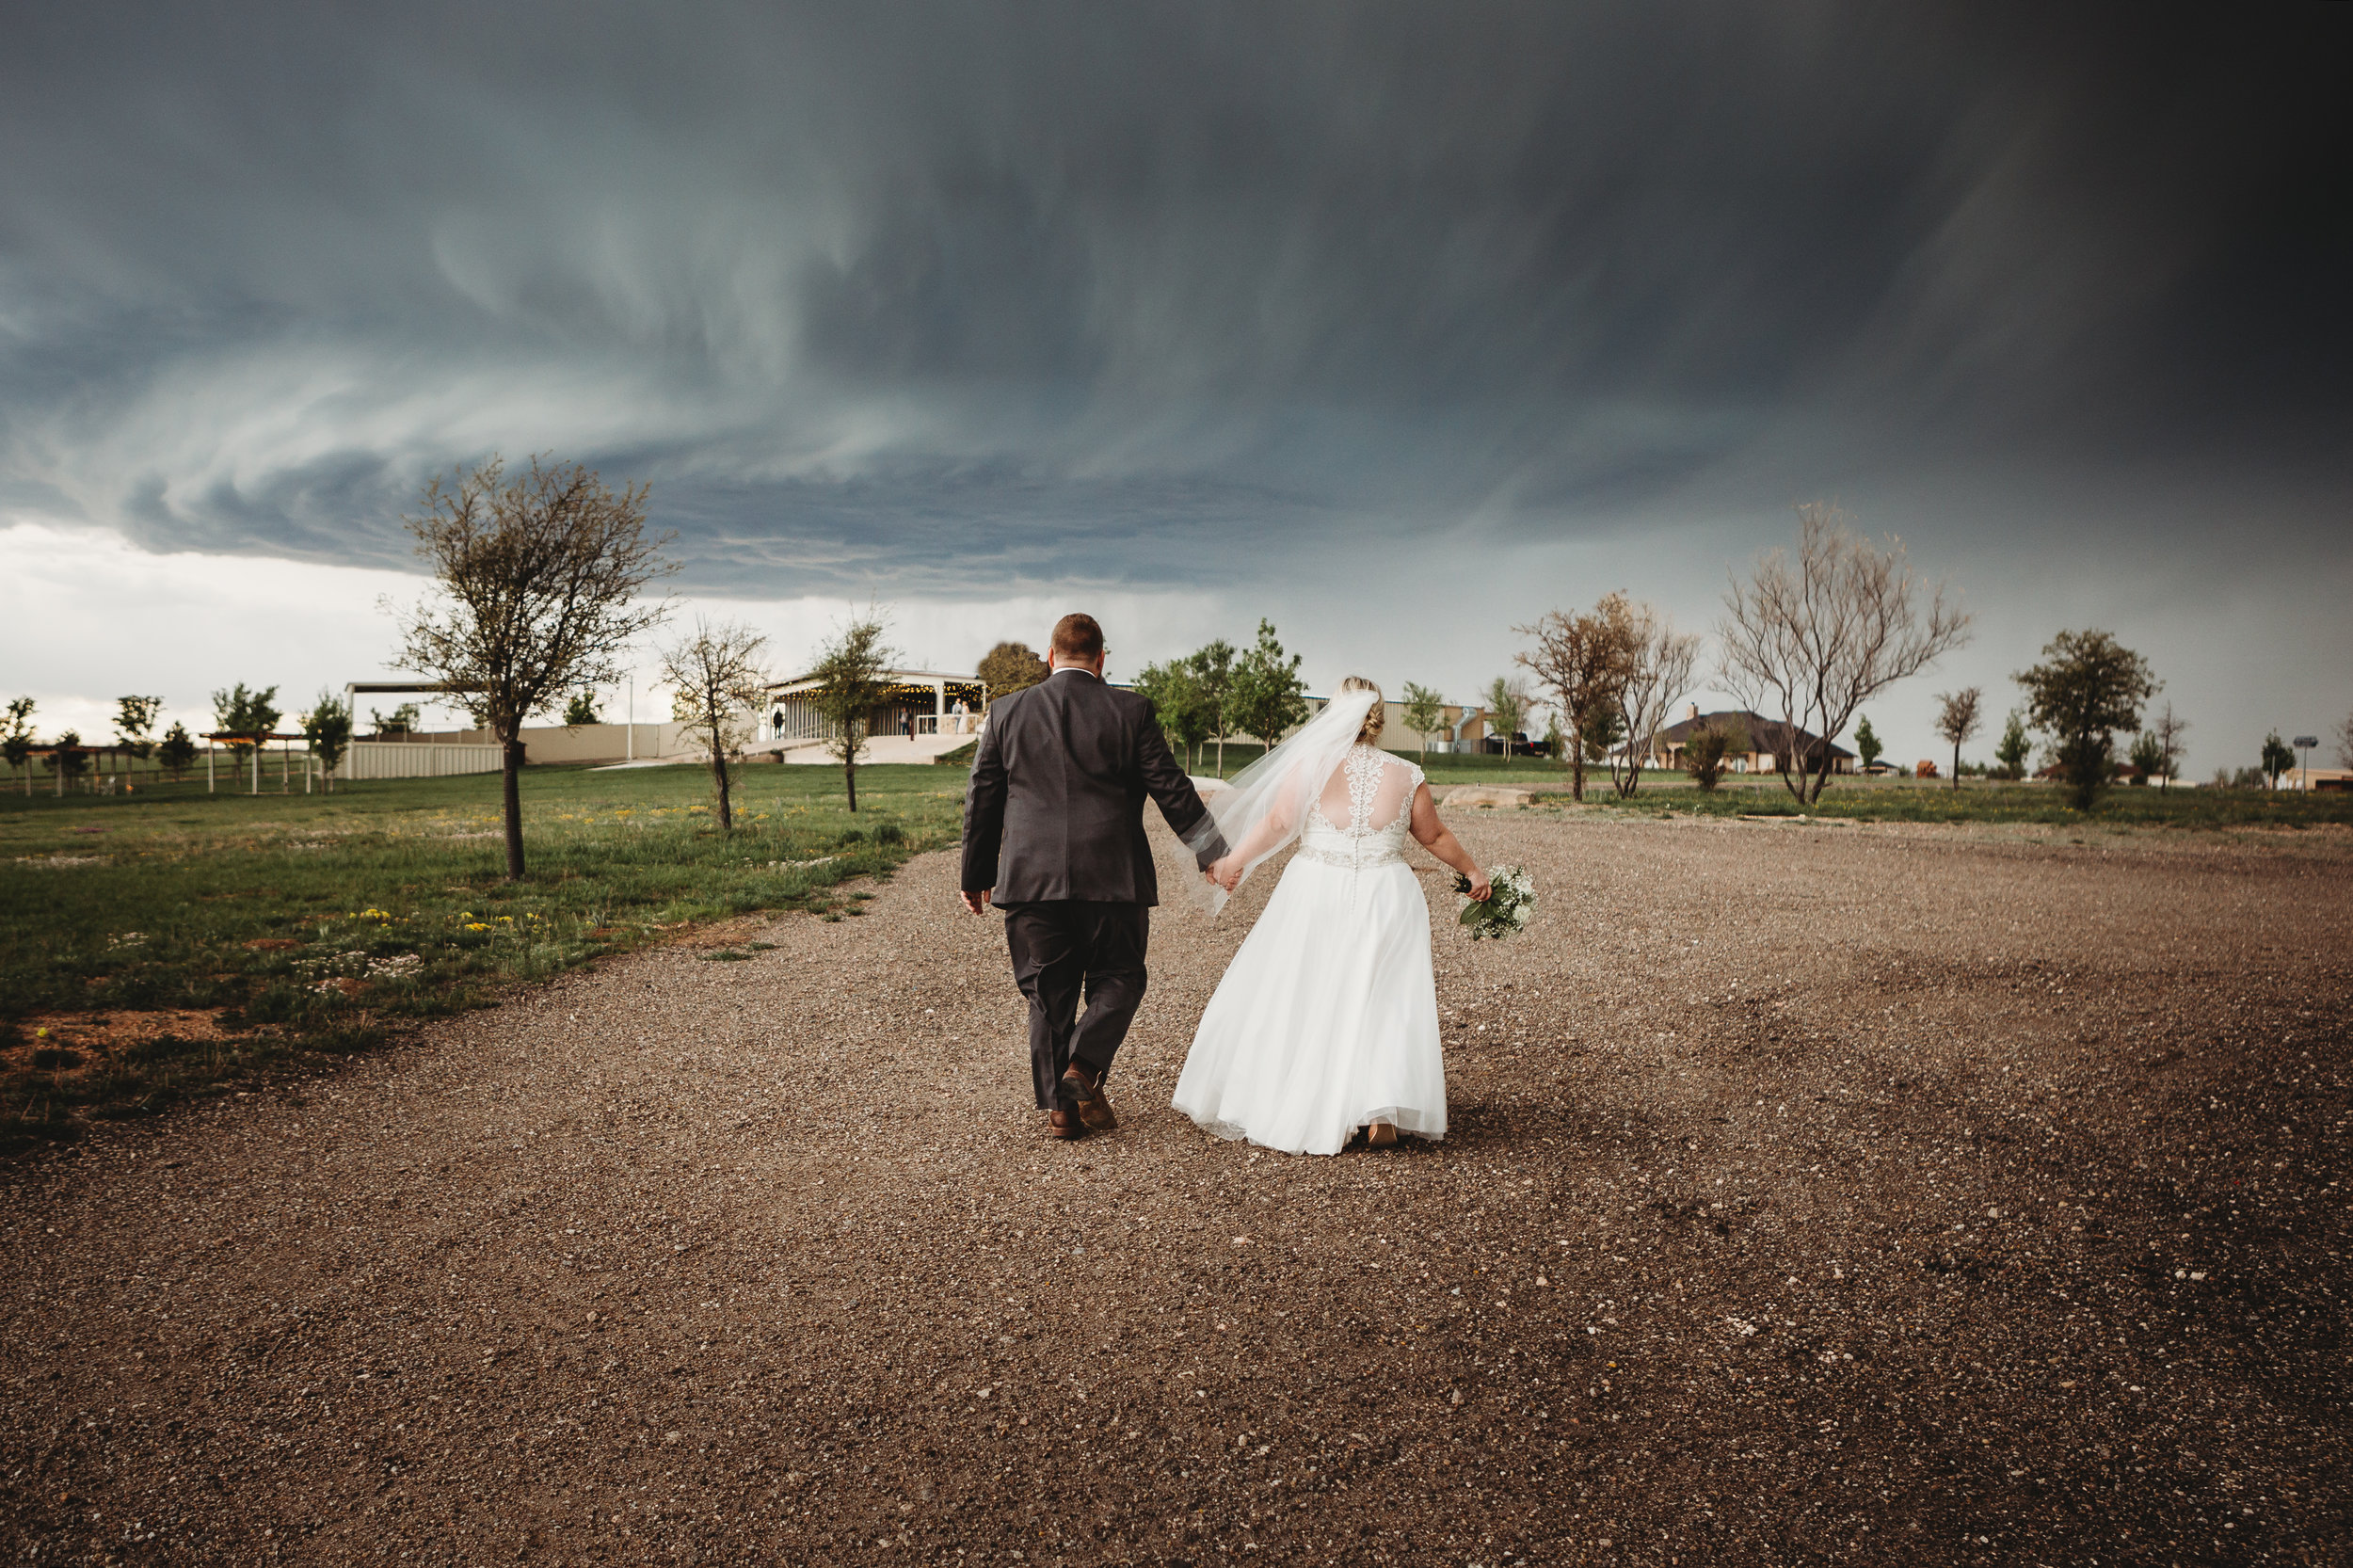  Storms on the horizon but keeping at bay during wedding portrait session with bride and groom #tealawardphotography #texasweddings #amarillophotographer #amarilloweddingphotographer #emotionalphotography #intimateweddingphotography #weddingday #weddingphotos #texasphotographer #inspiredwedding #intimatewedding #weddingformals #bigday #portraits 